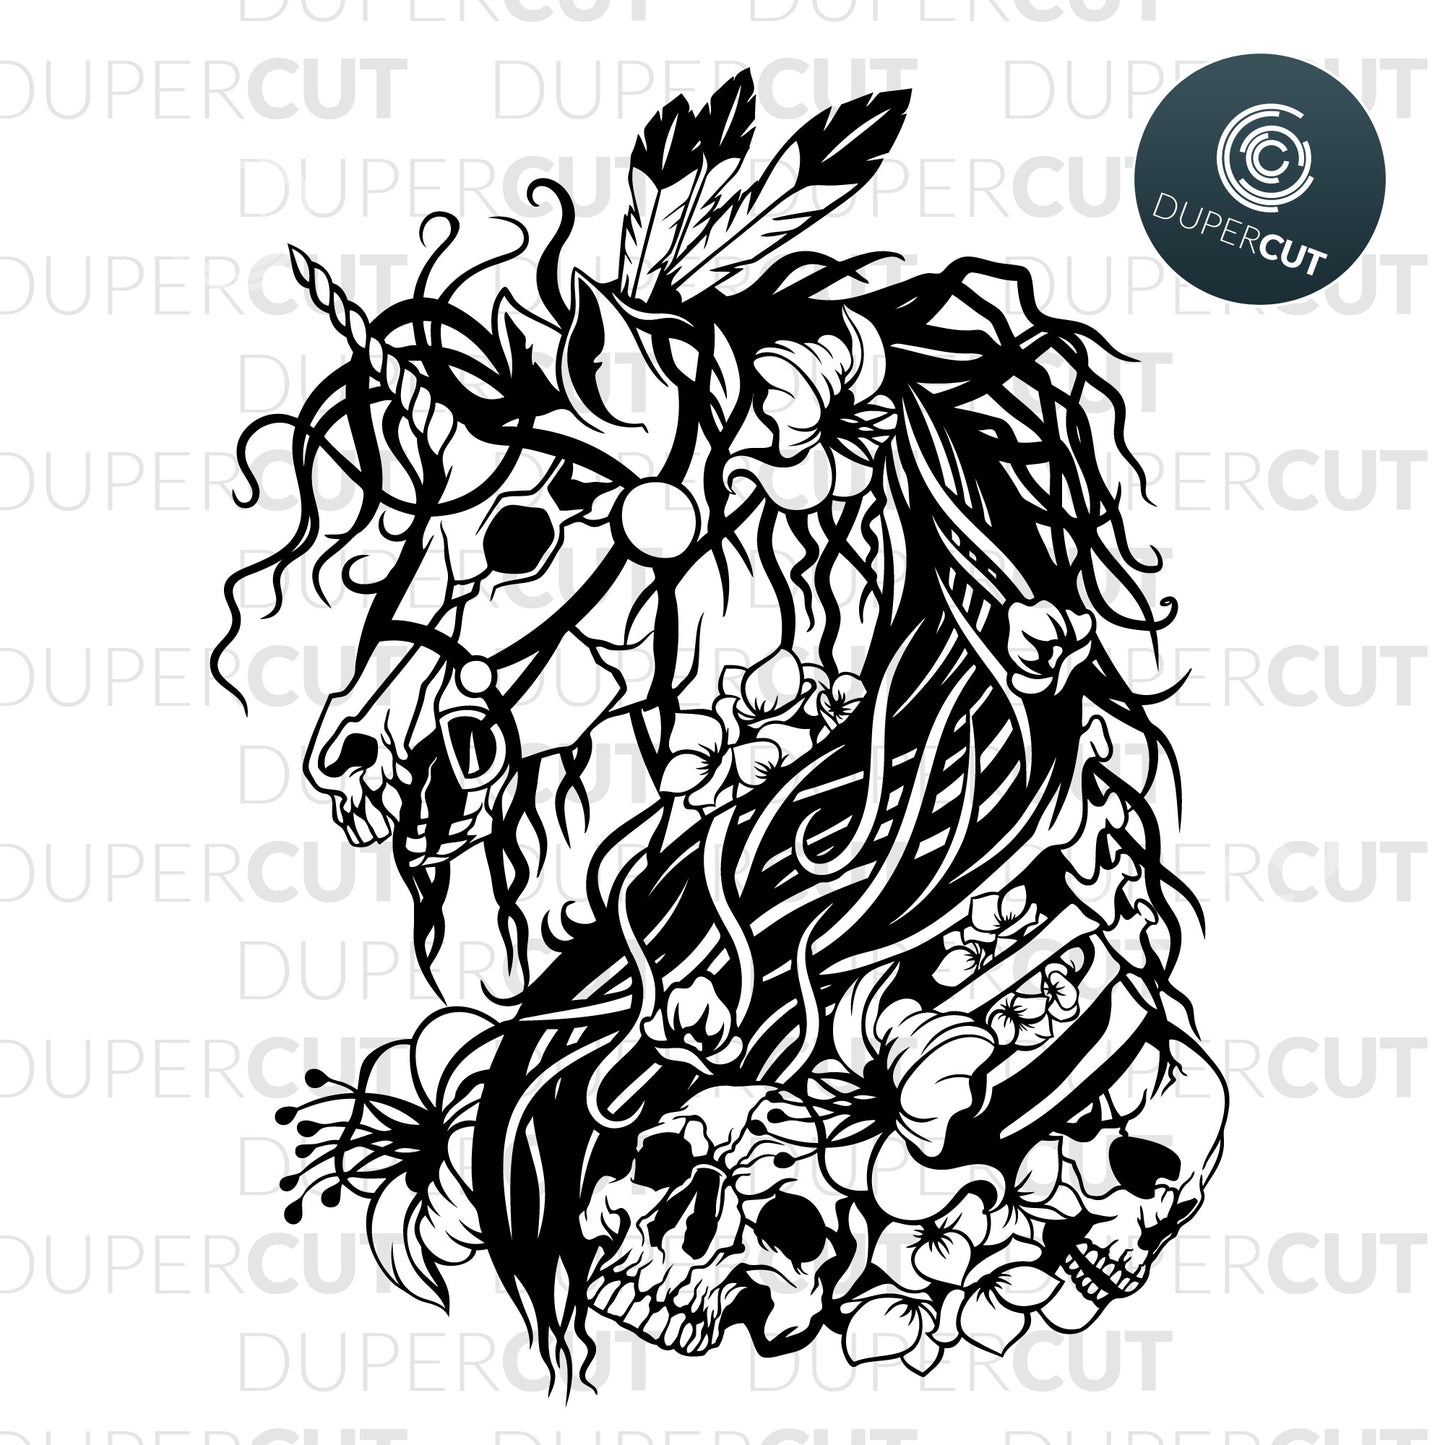 Zombie Unicorn gothic line art illustration. Paper cutting template SVG PNG DXF files. For DIY projects Cricut, Glowforge, Silhouette Cameo, CNC Machines.